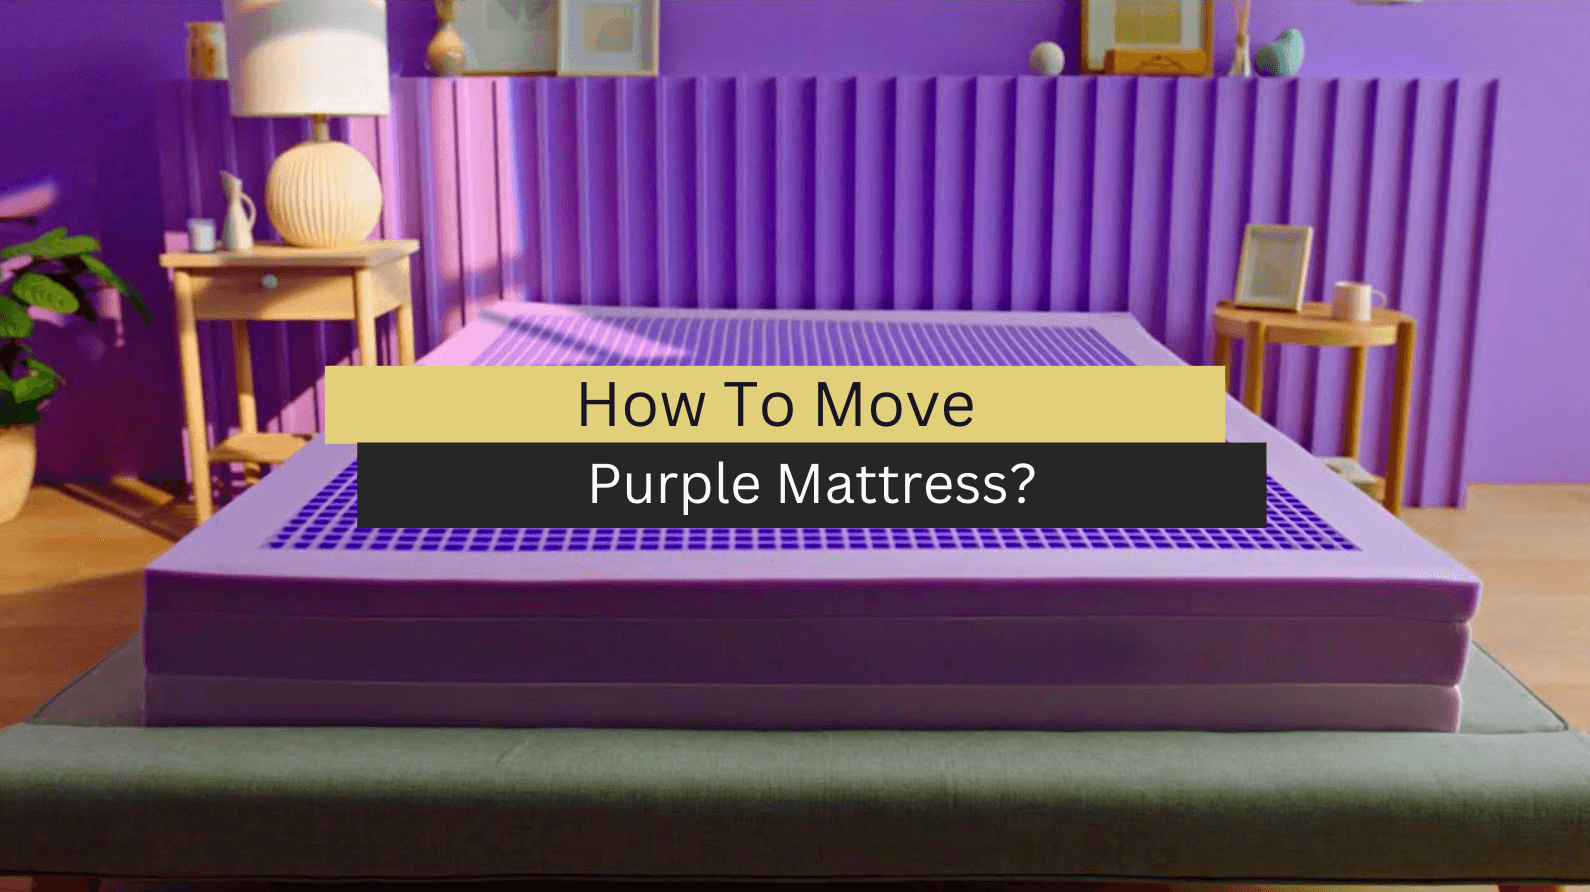 How To Move Purple Mattress? (A Step-By-Step Guide)